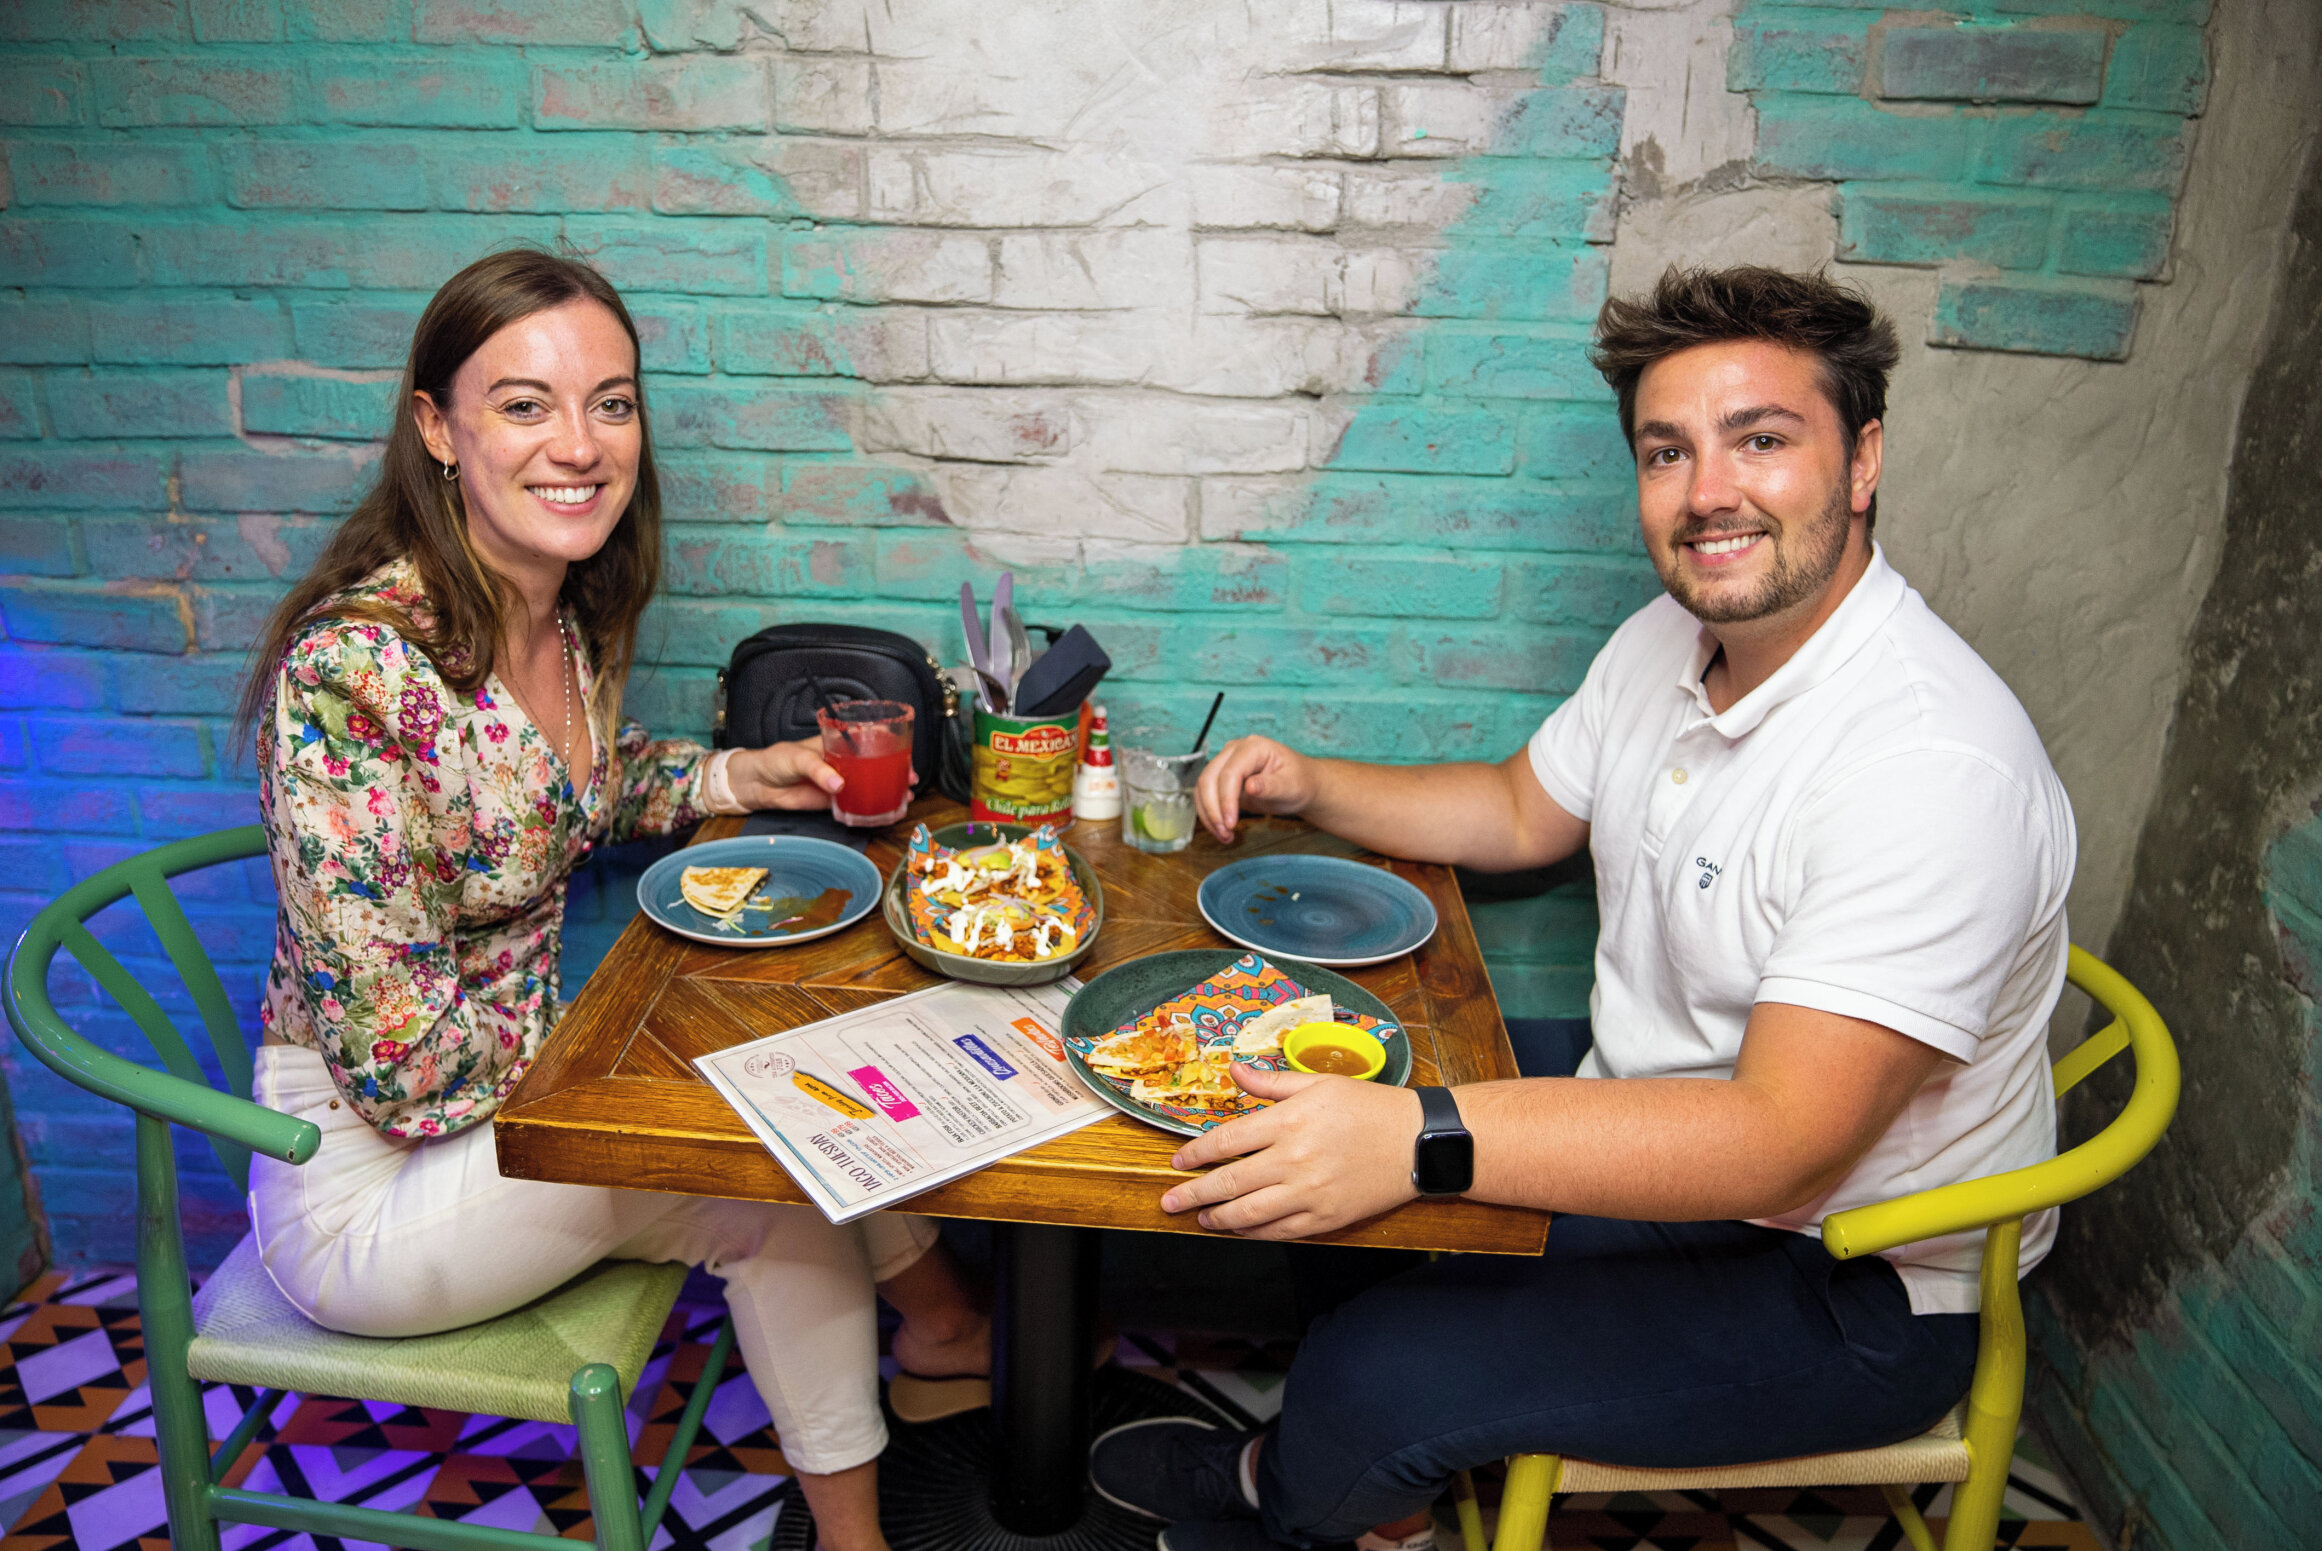 Join us in a fiesta @elchapostacosdxb 💃⁣
⁣
A Mexican Oasis is waiting for you 🇲🇽⁣
⁣
Book now⁣
📩eat@elchapostacos.com⁣
⁣
#Mexicanoasis #elchapostacos